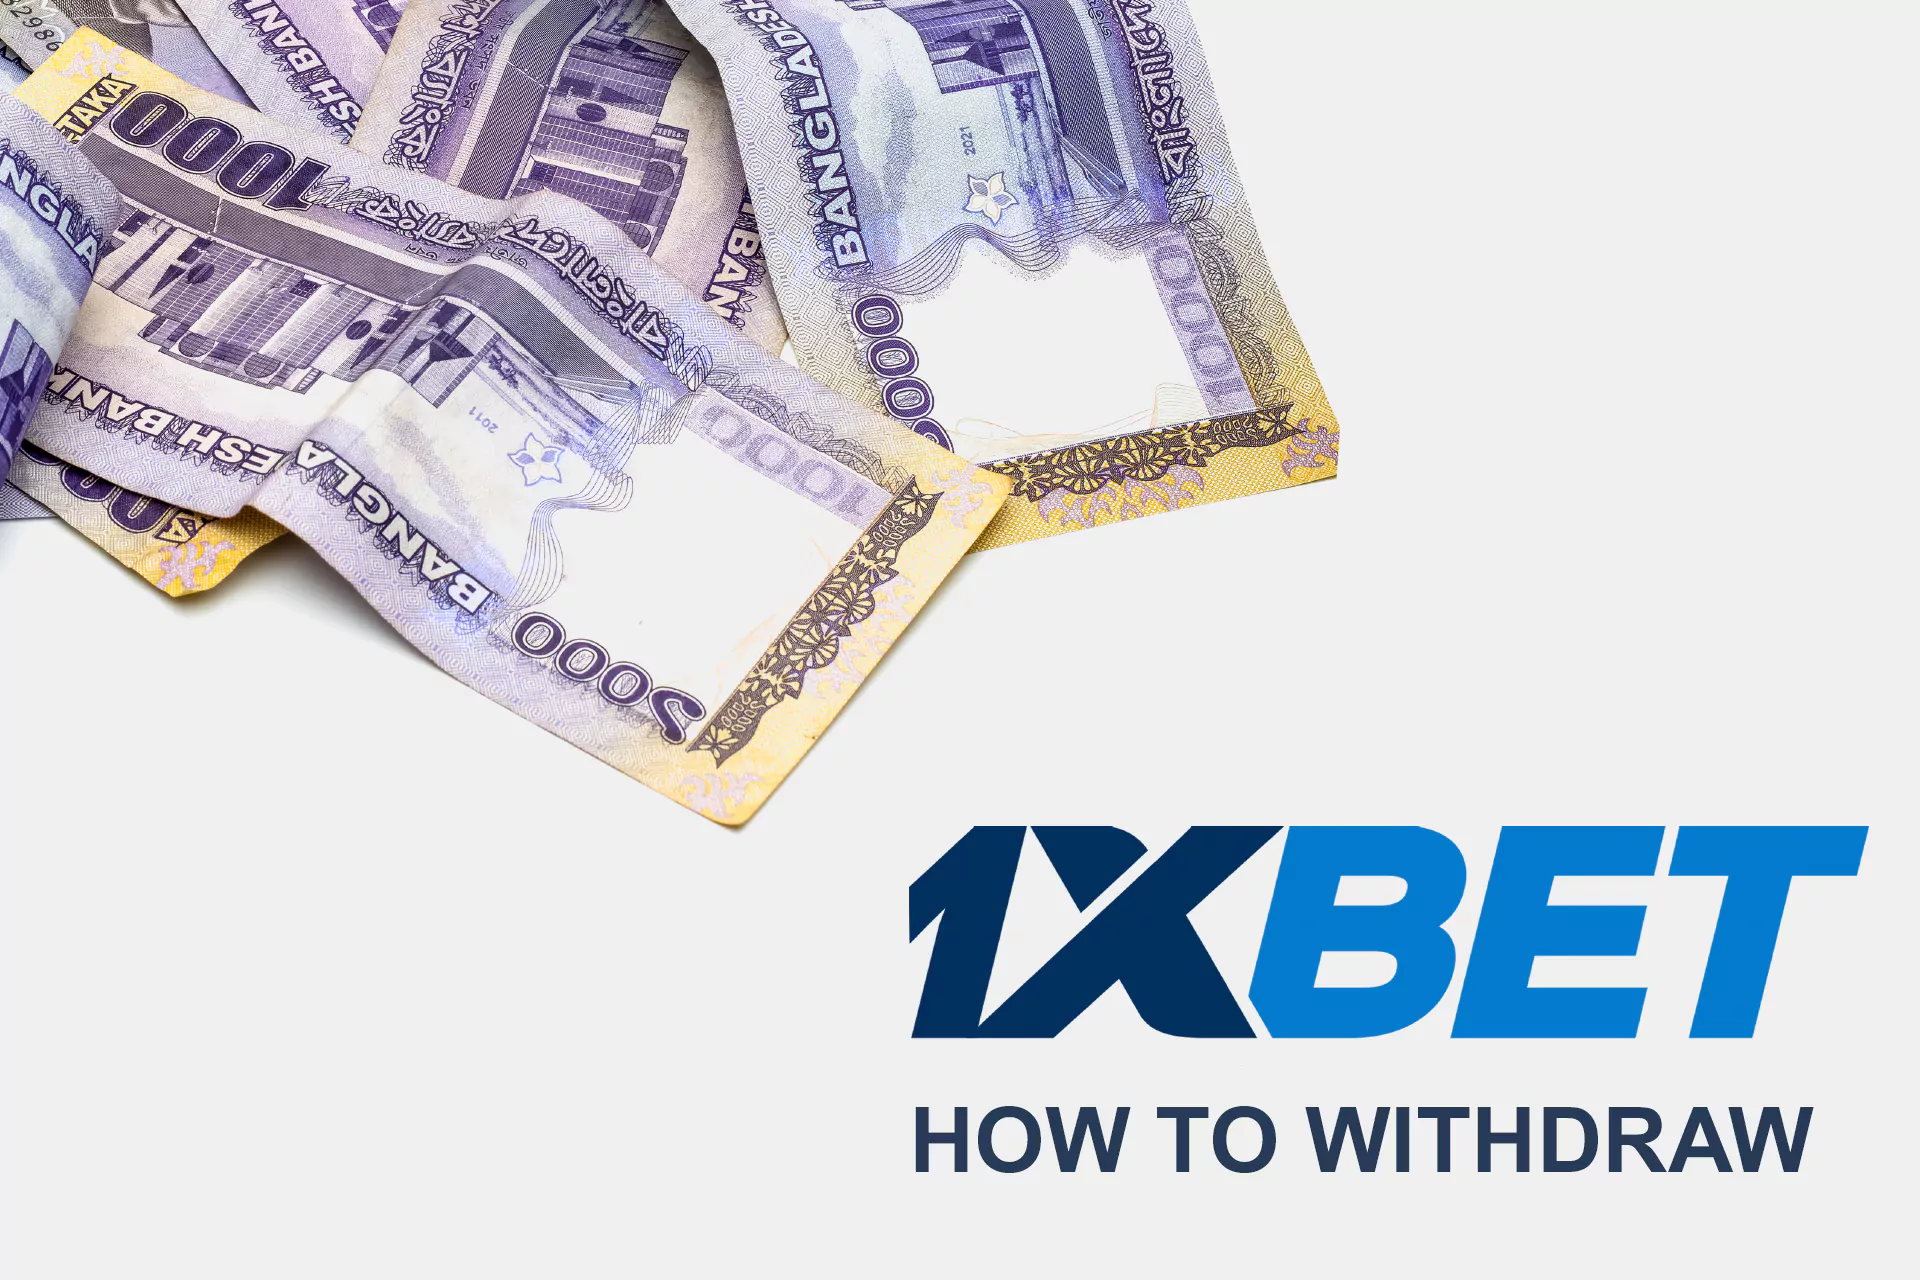 After you win back your bonus amount, you can withdraw money from the 1xBet account.